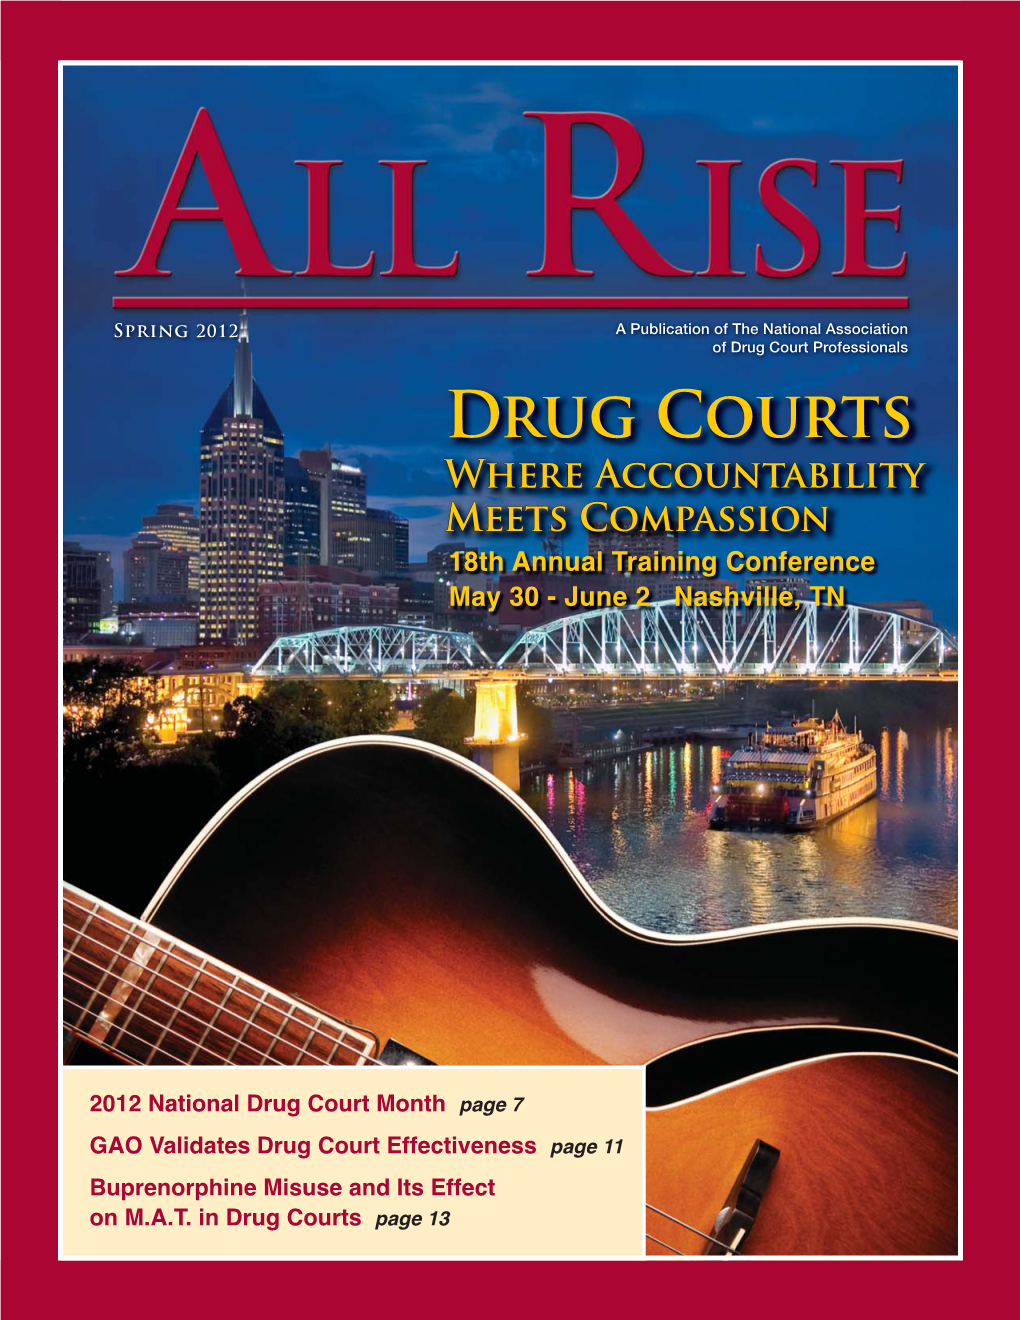 Drug Courts Wwherehere Aaccountabilityccountability Mmeetseets Compassioncompassion 18Th Annual Training Conference May 30 - June 2 Nashville, TN